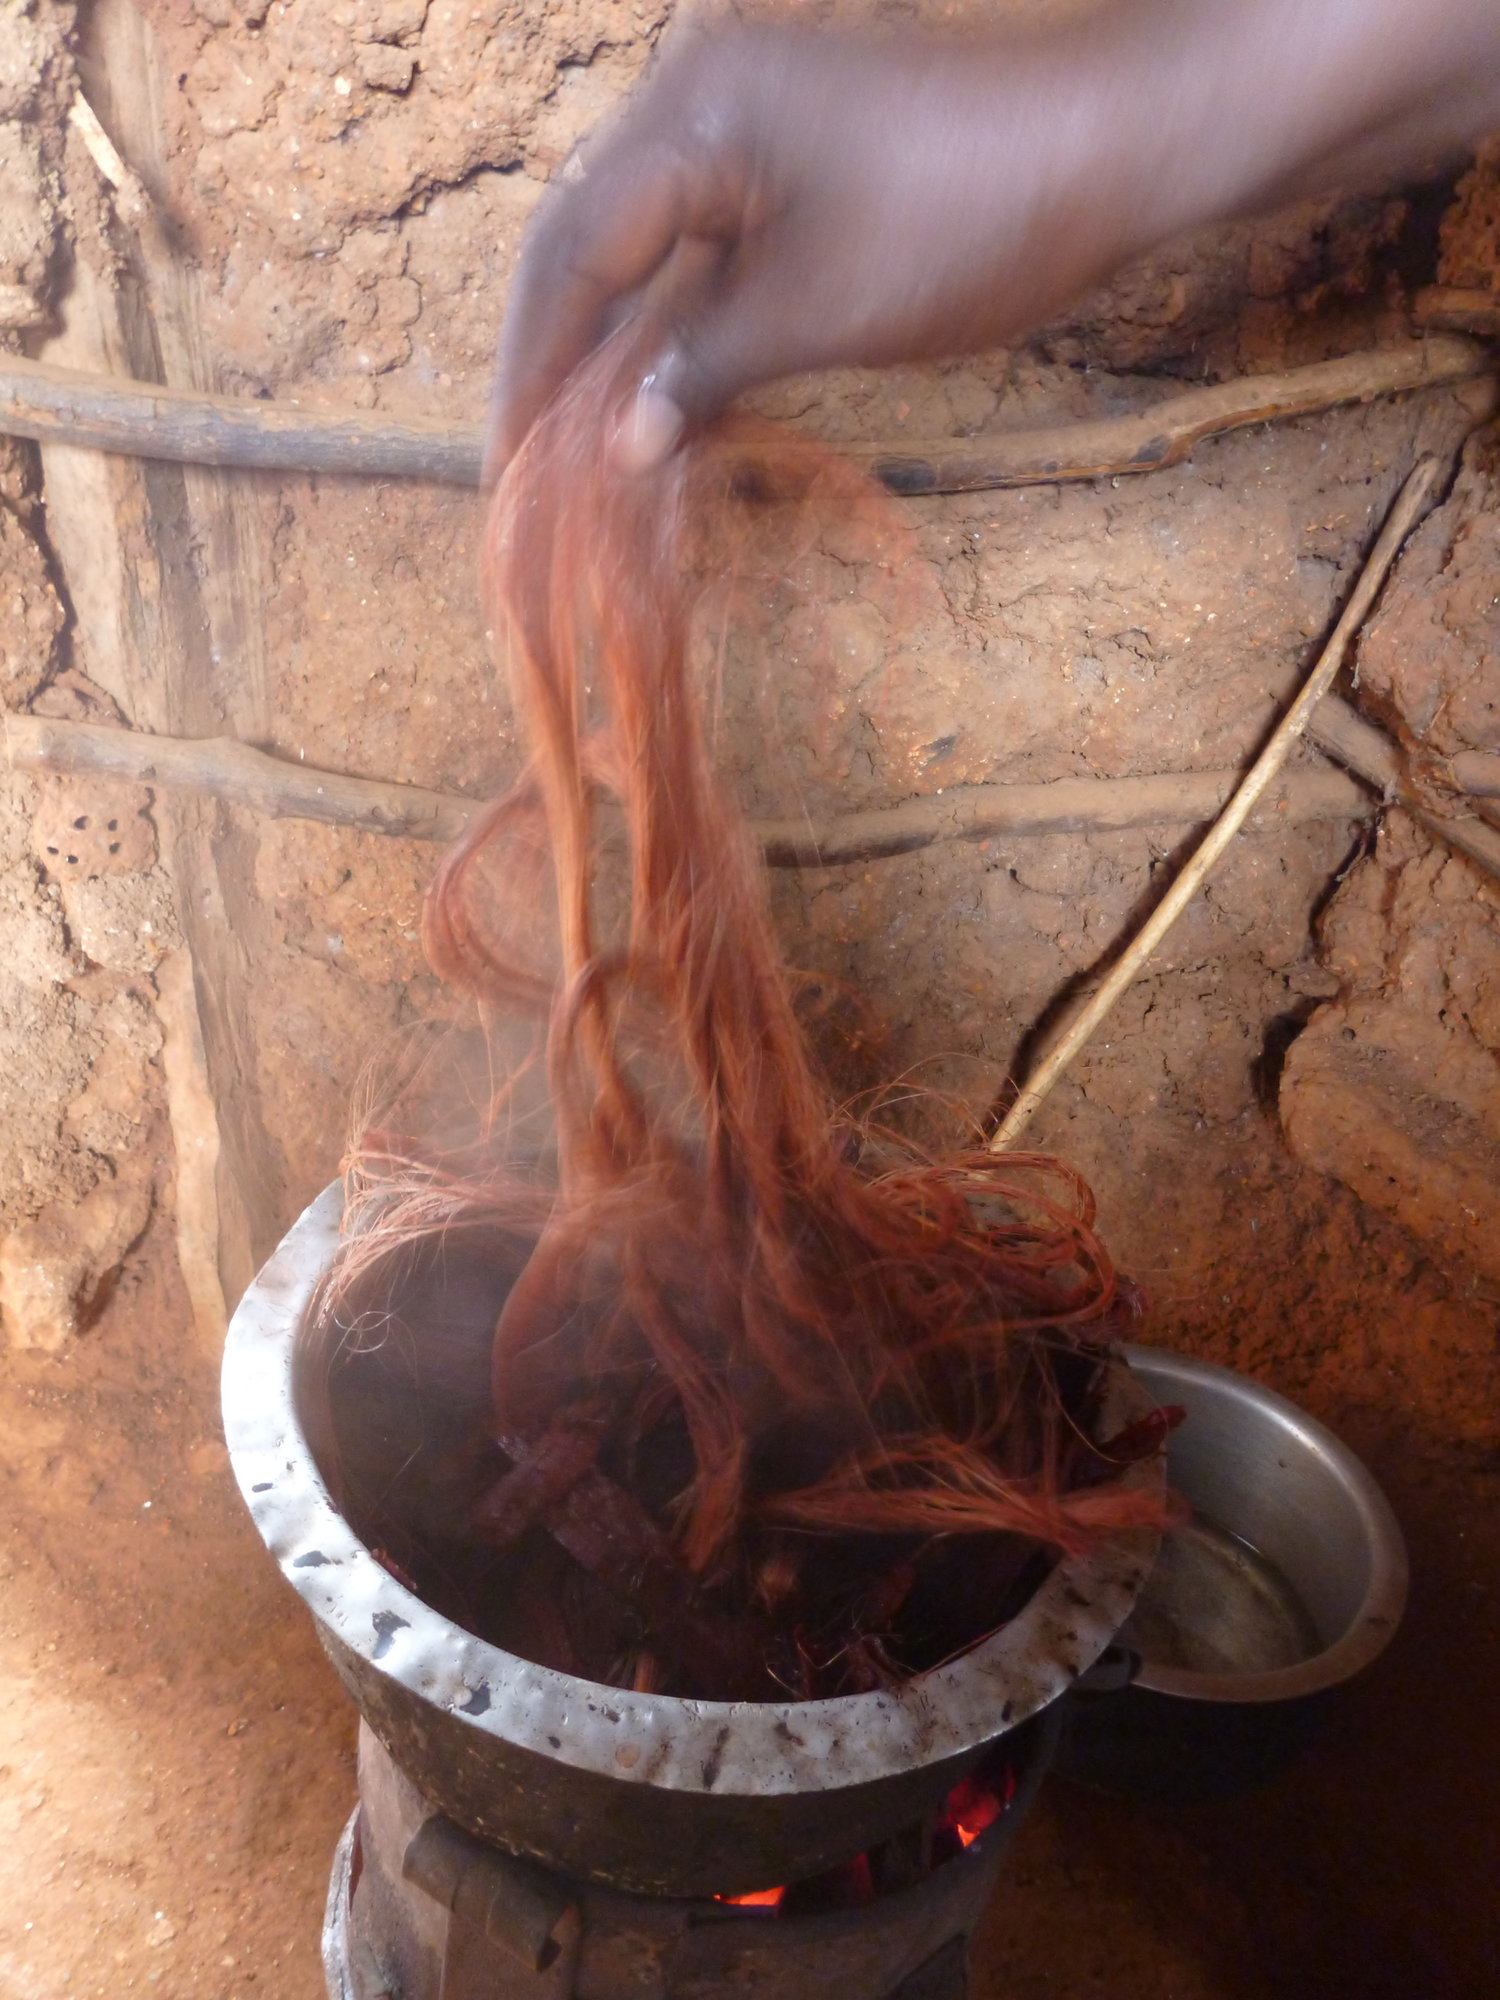 3. Dyeing & Drying